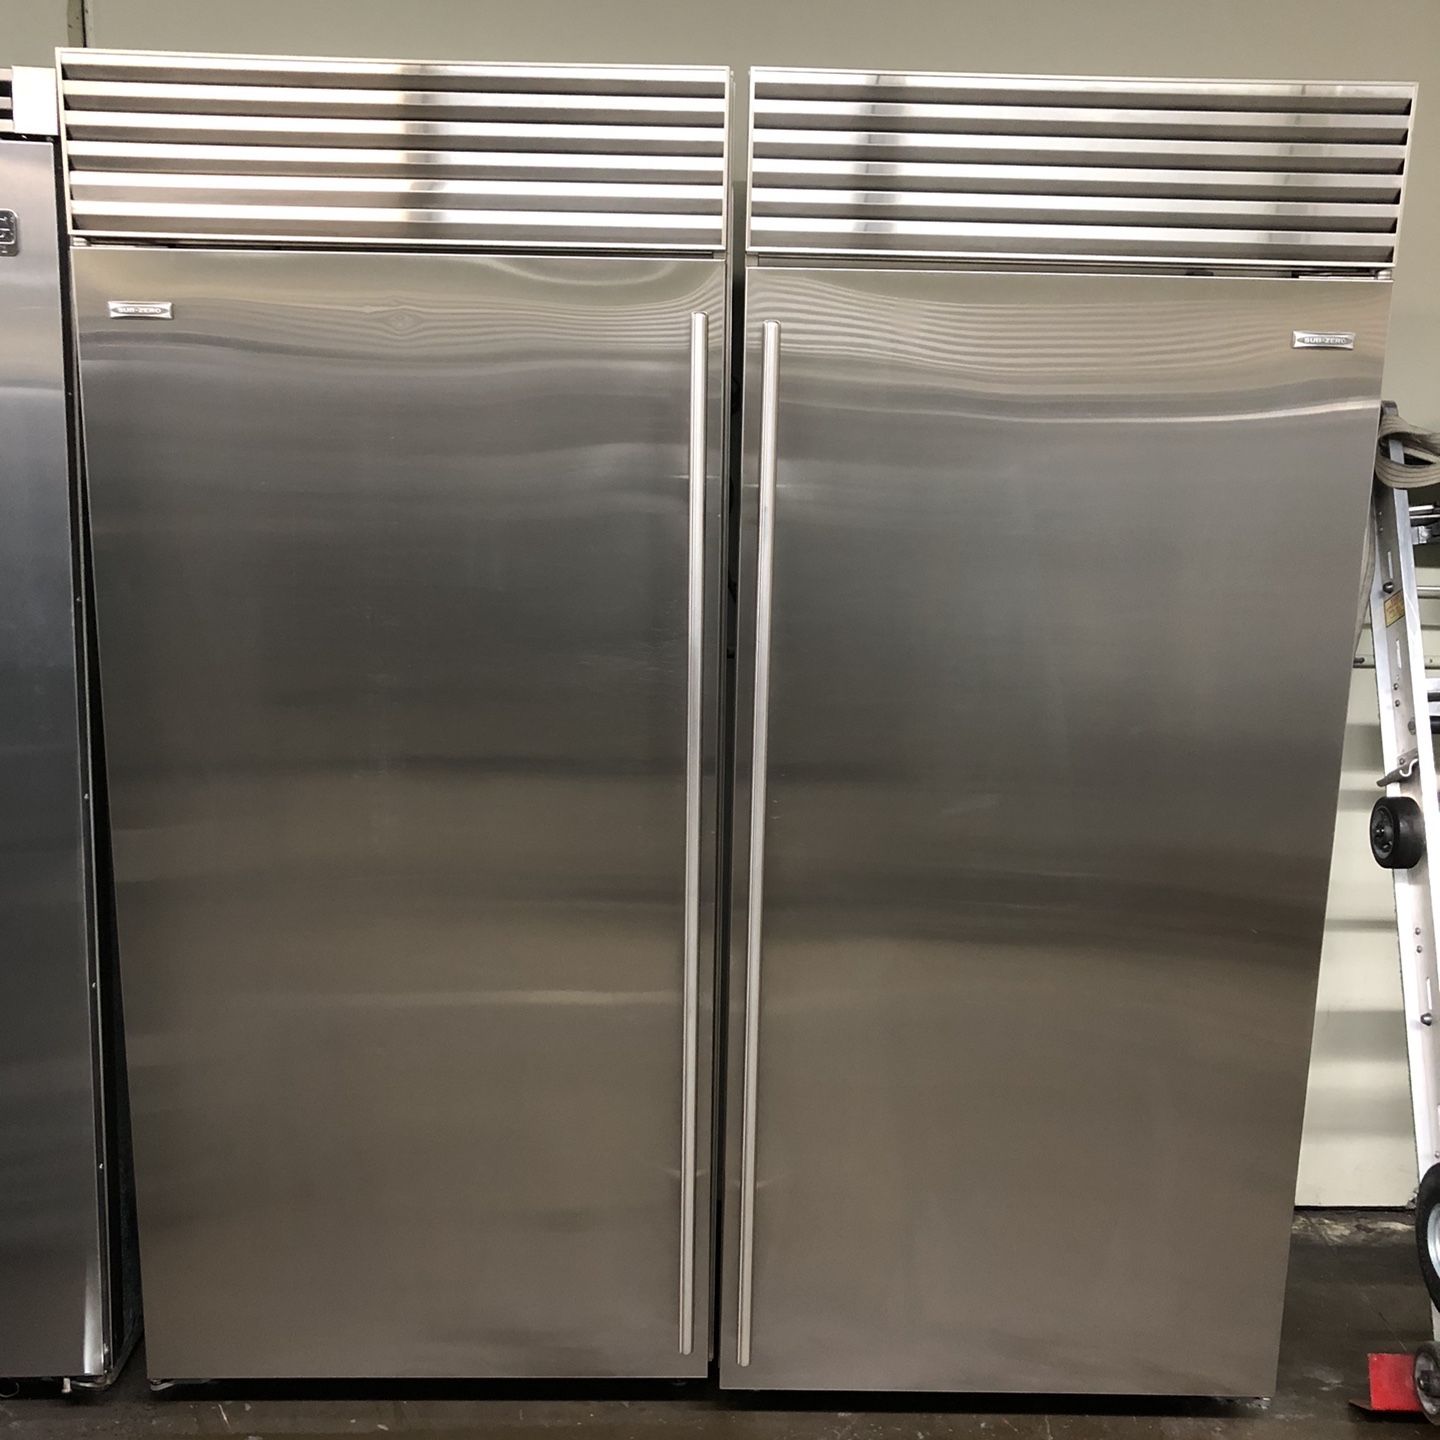 Sub Zero 72”Wide Built In Side By Side Stainless Steel Refrigerator Columns 